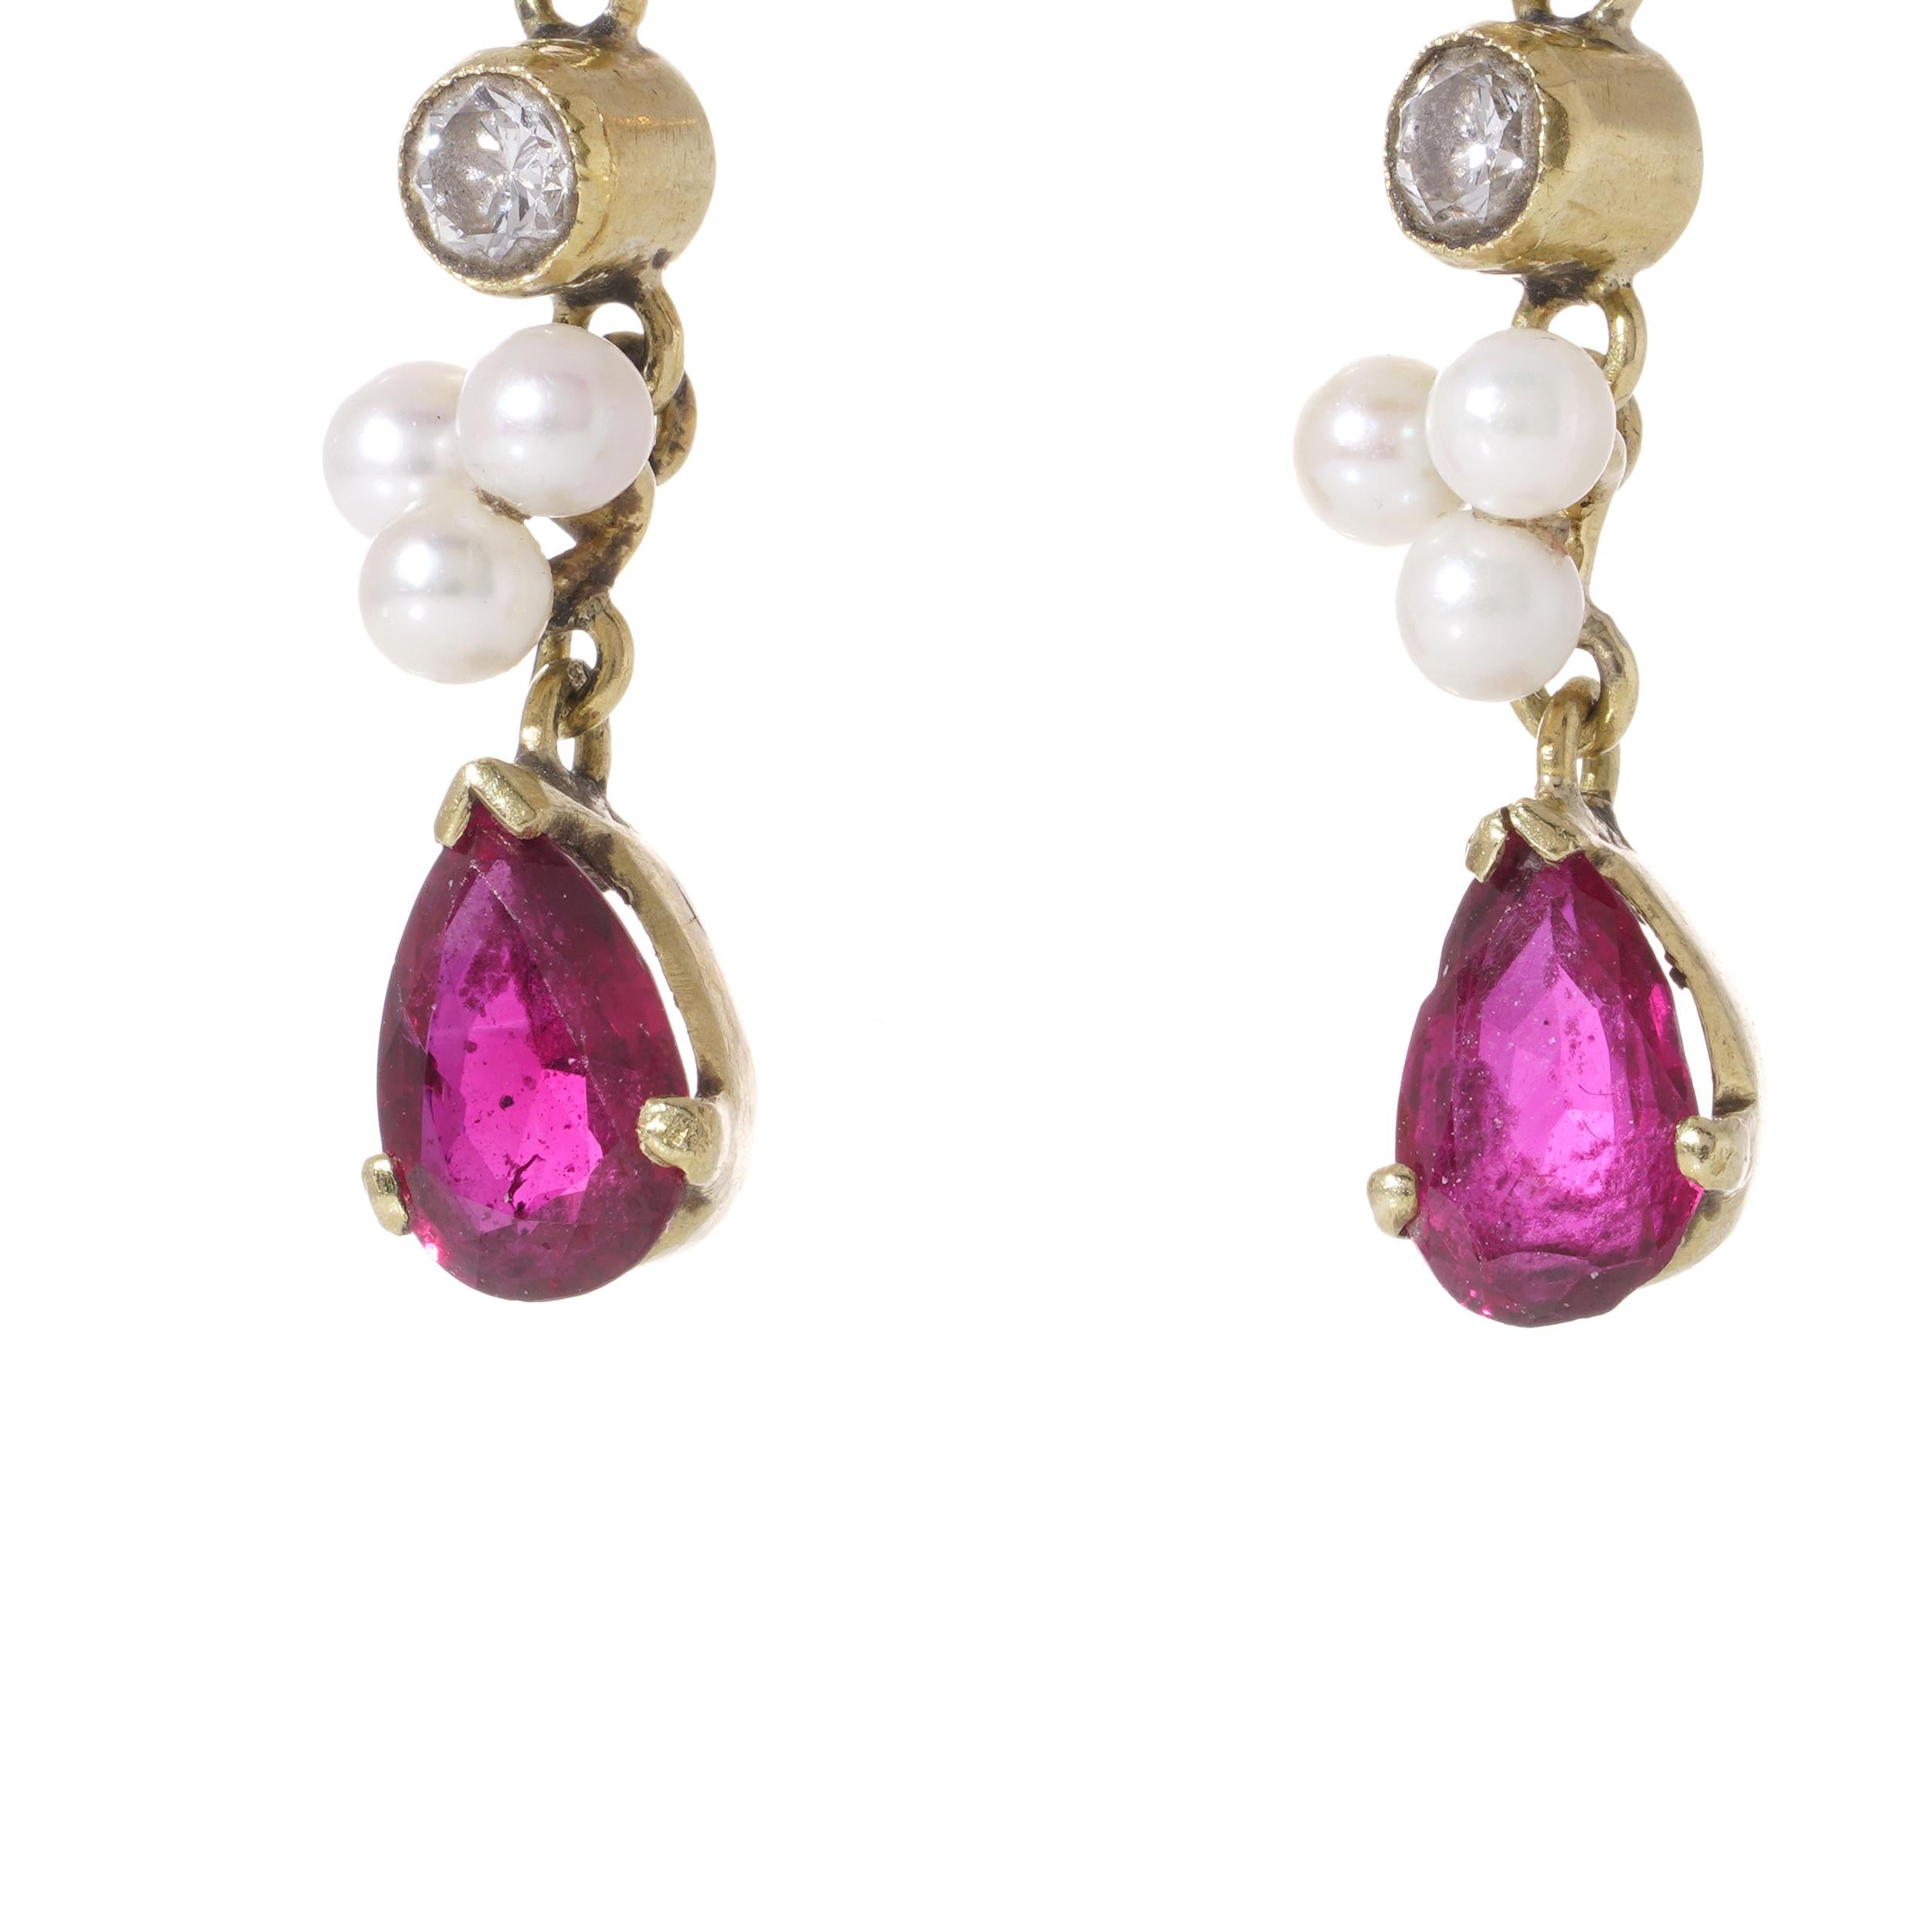 18kt. gold drop earrings set with natural Burma rubies, pearls and diamonds In Good Condition For Sale In Braintree, GB